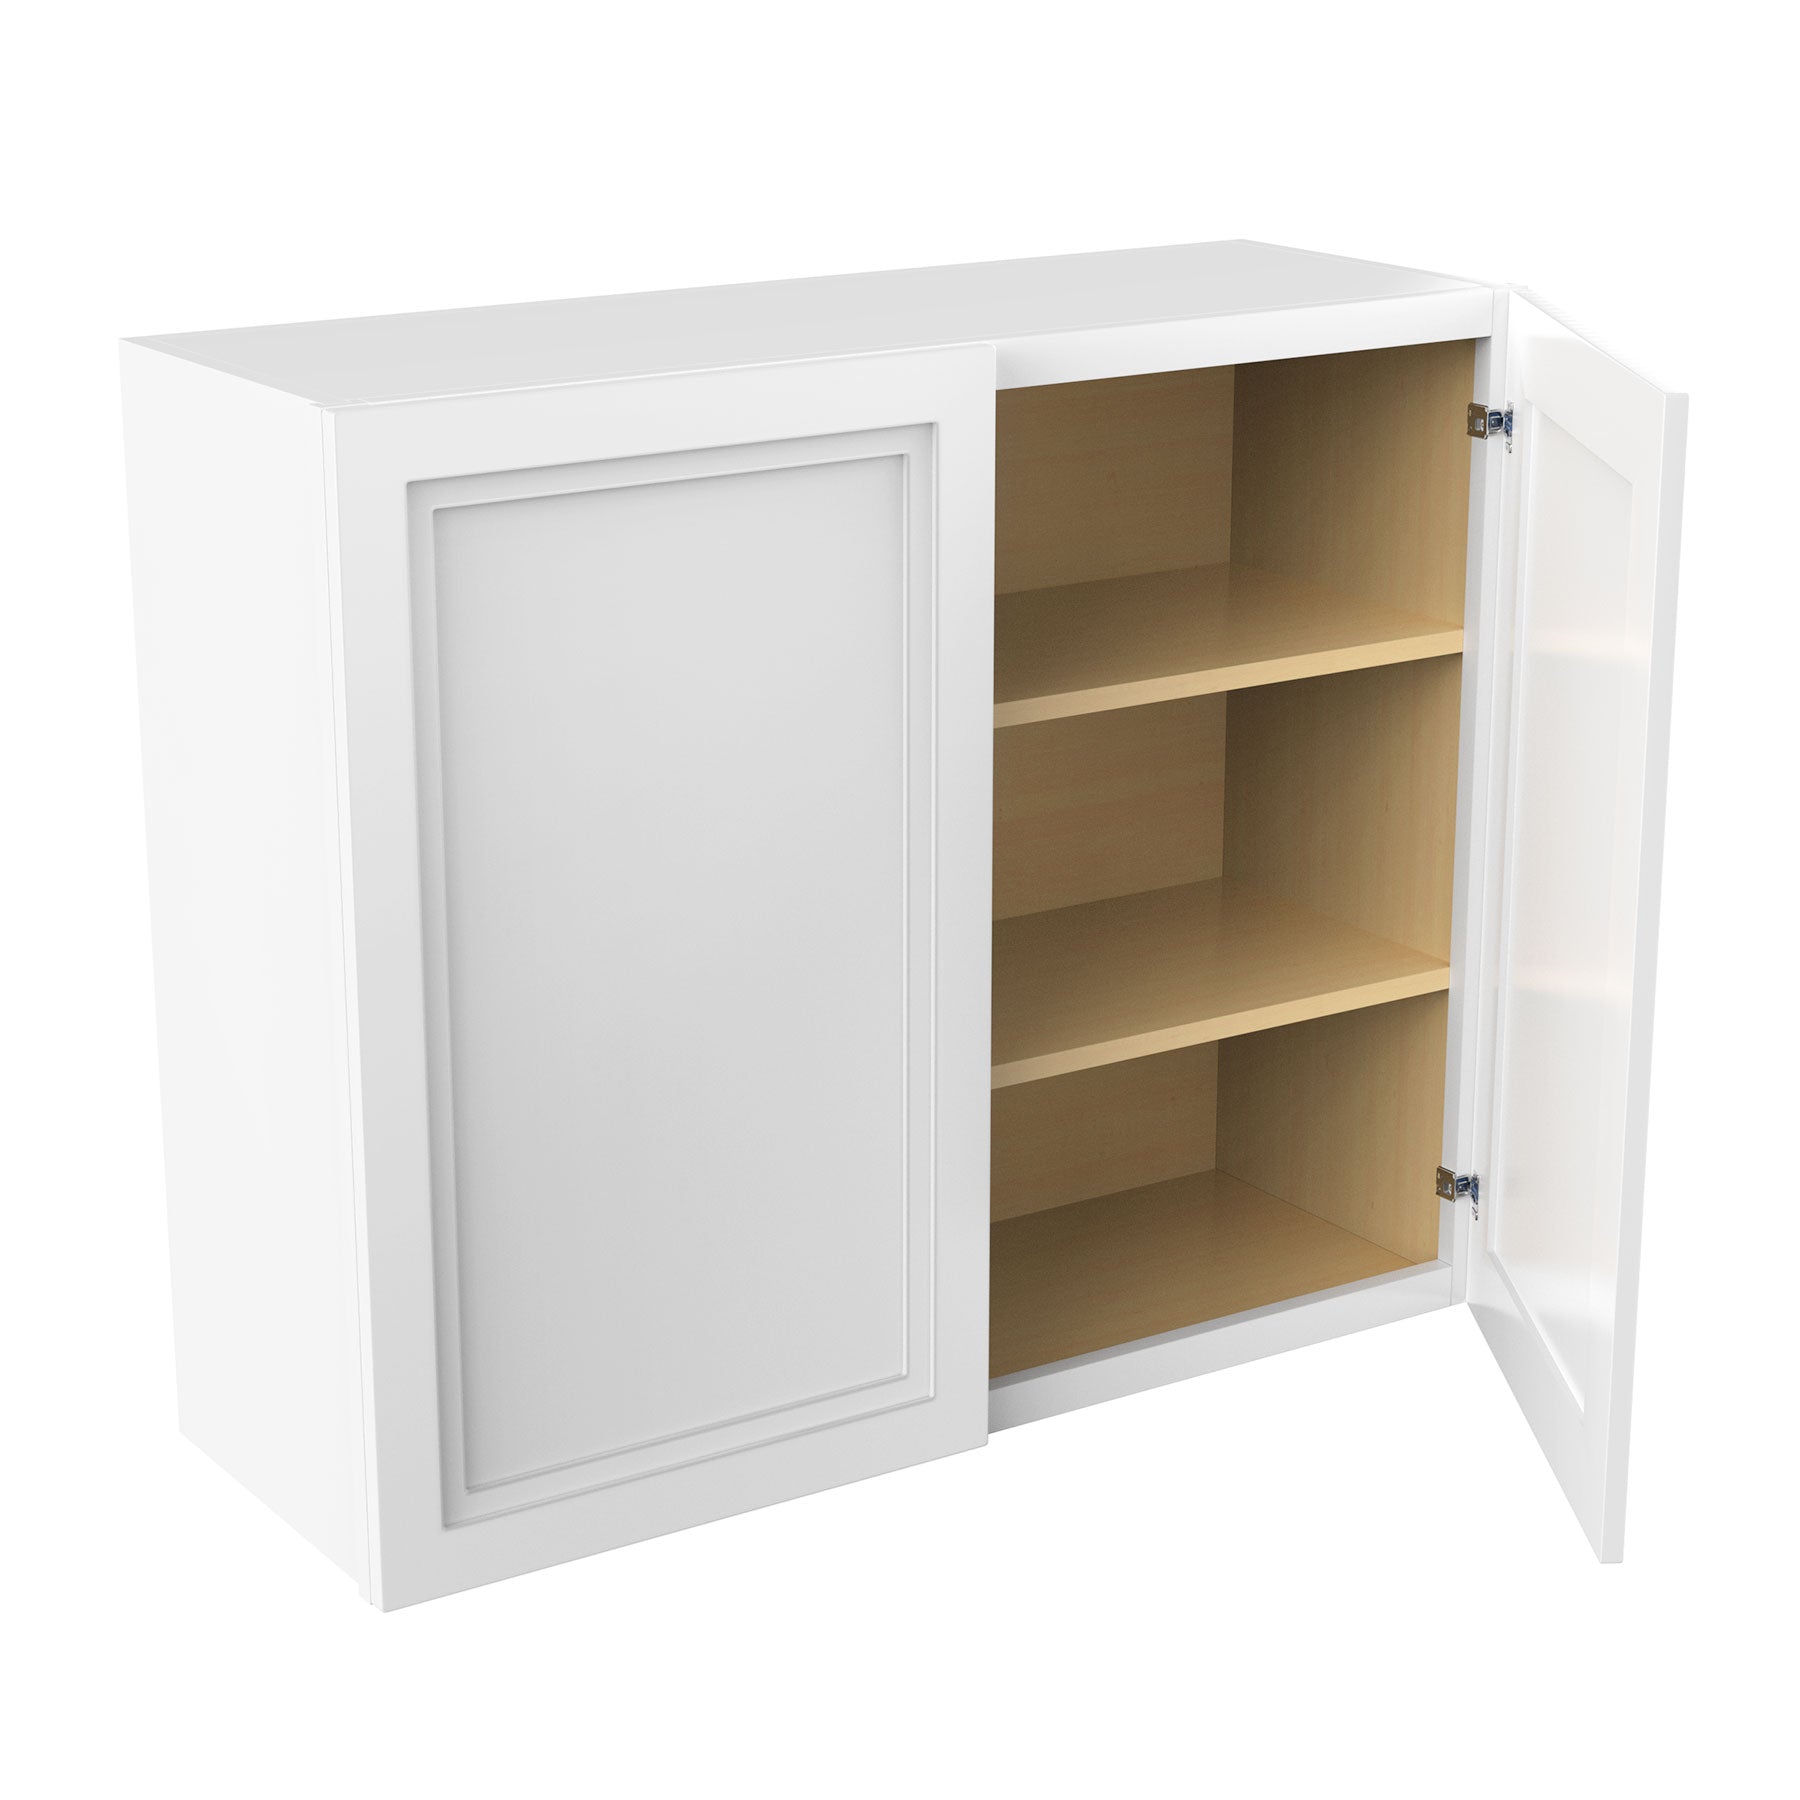 Fashion White - Double Door Wall Cabinet | 36"W x 30"H x 12"D